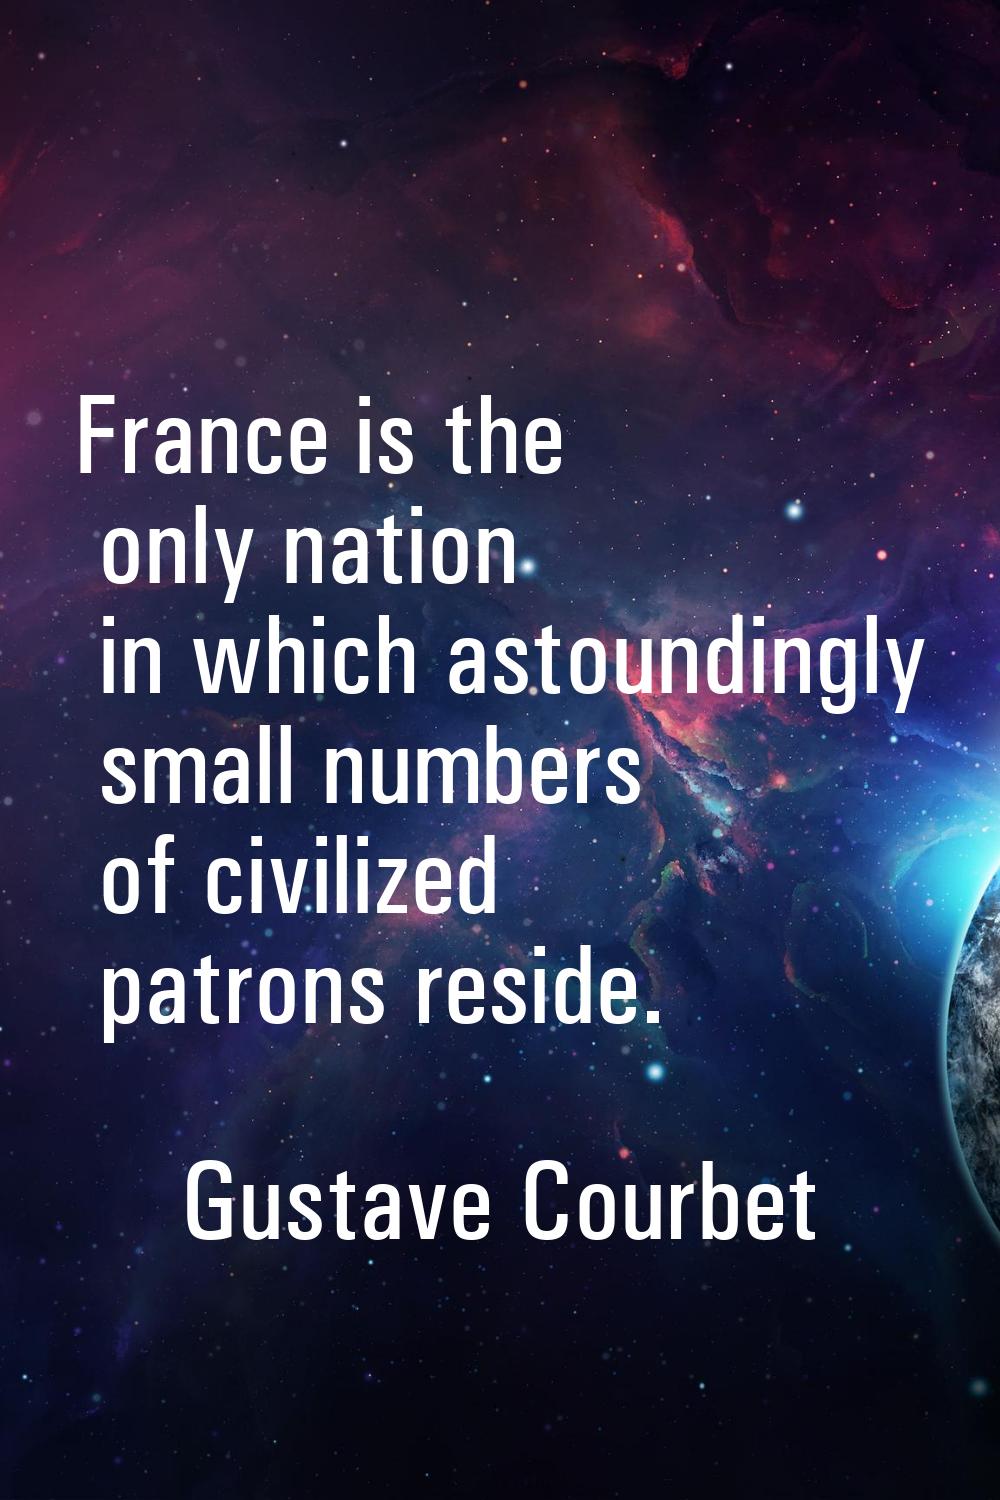 France is the only nation in which astoundingly small numbers of civilized patrons reside.